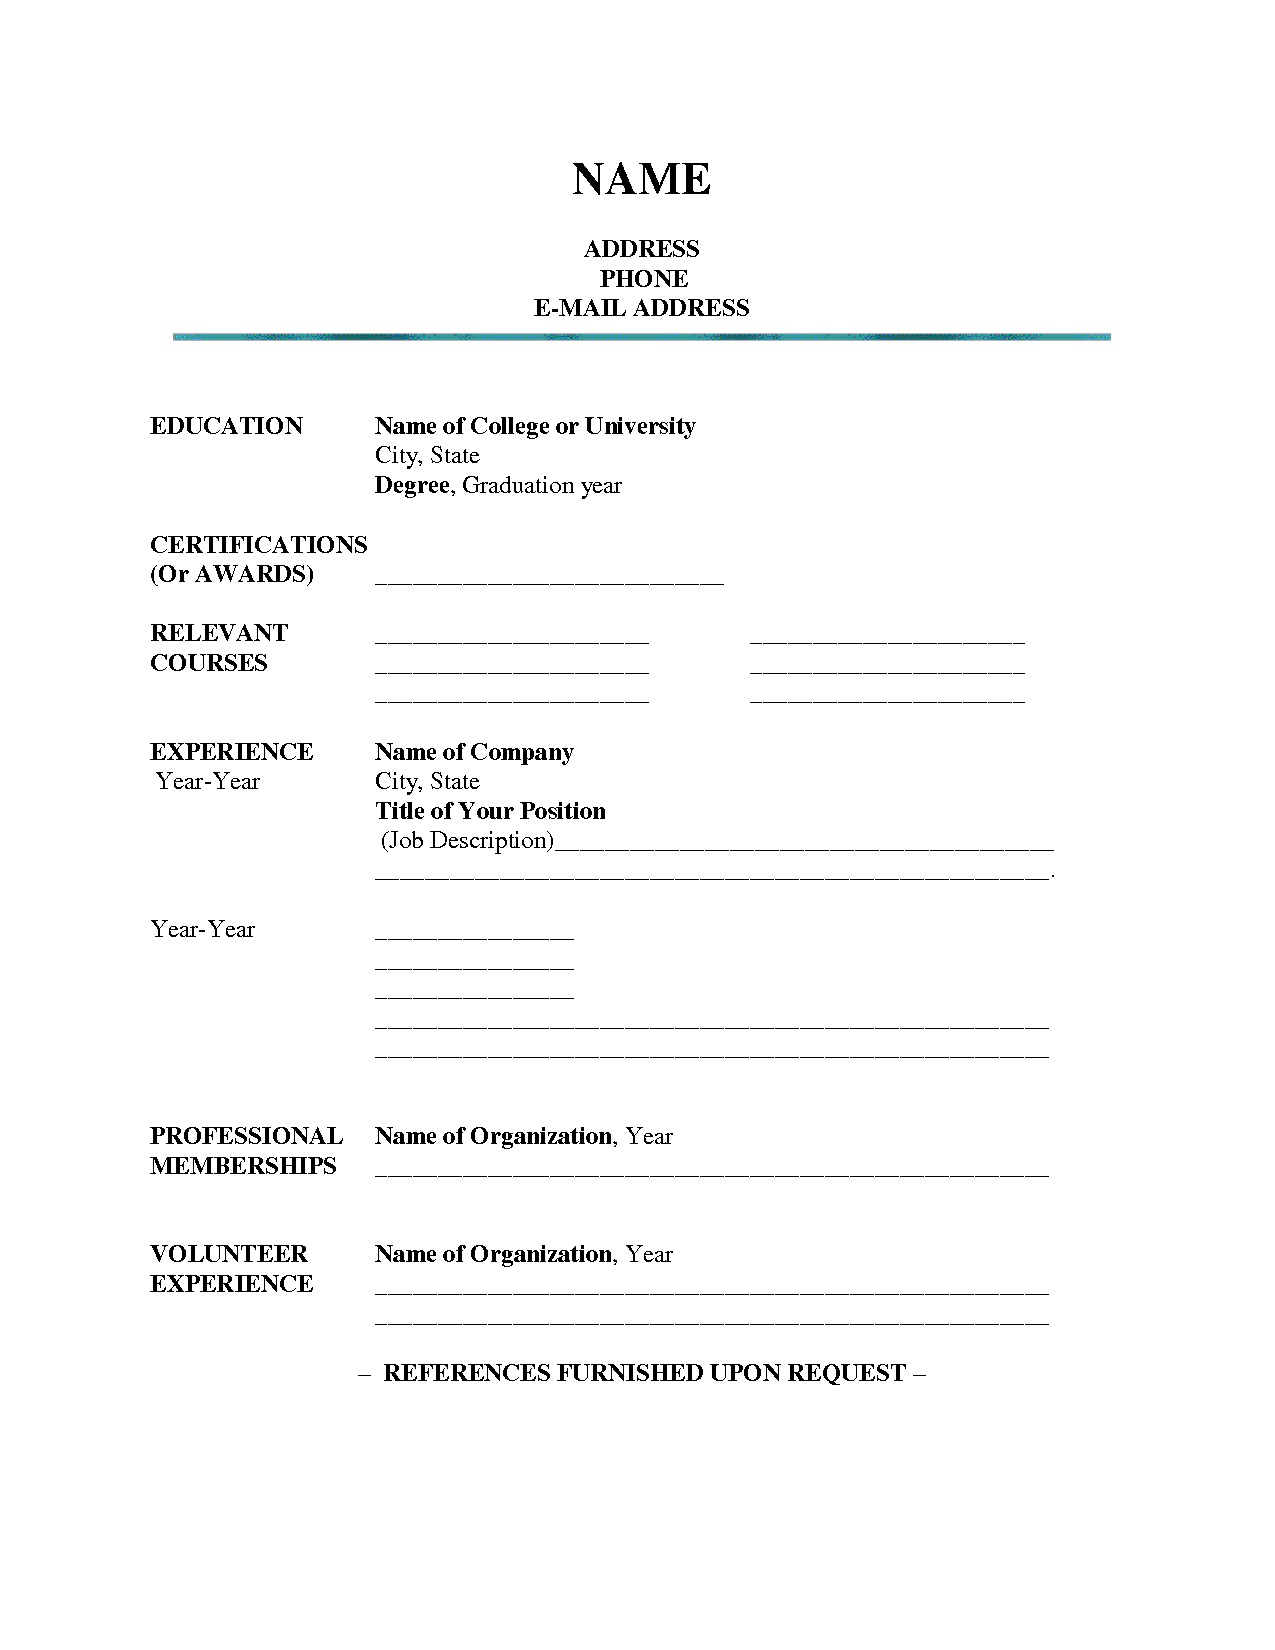 Blank Resume Templates For Microsoft Word – Calep.midnightpig.co Within Free Blank Resume Templates For Microsoft Word